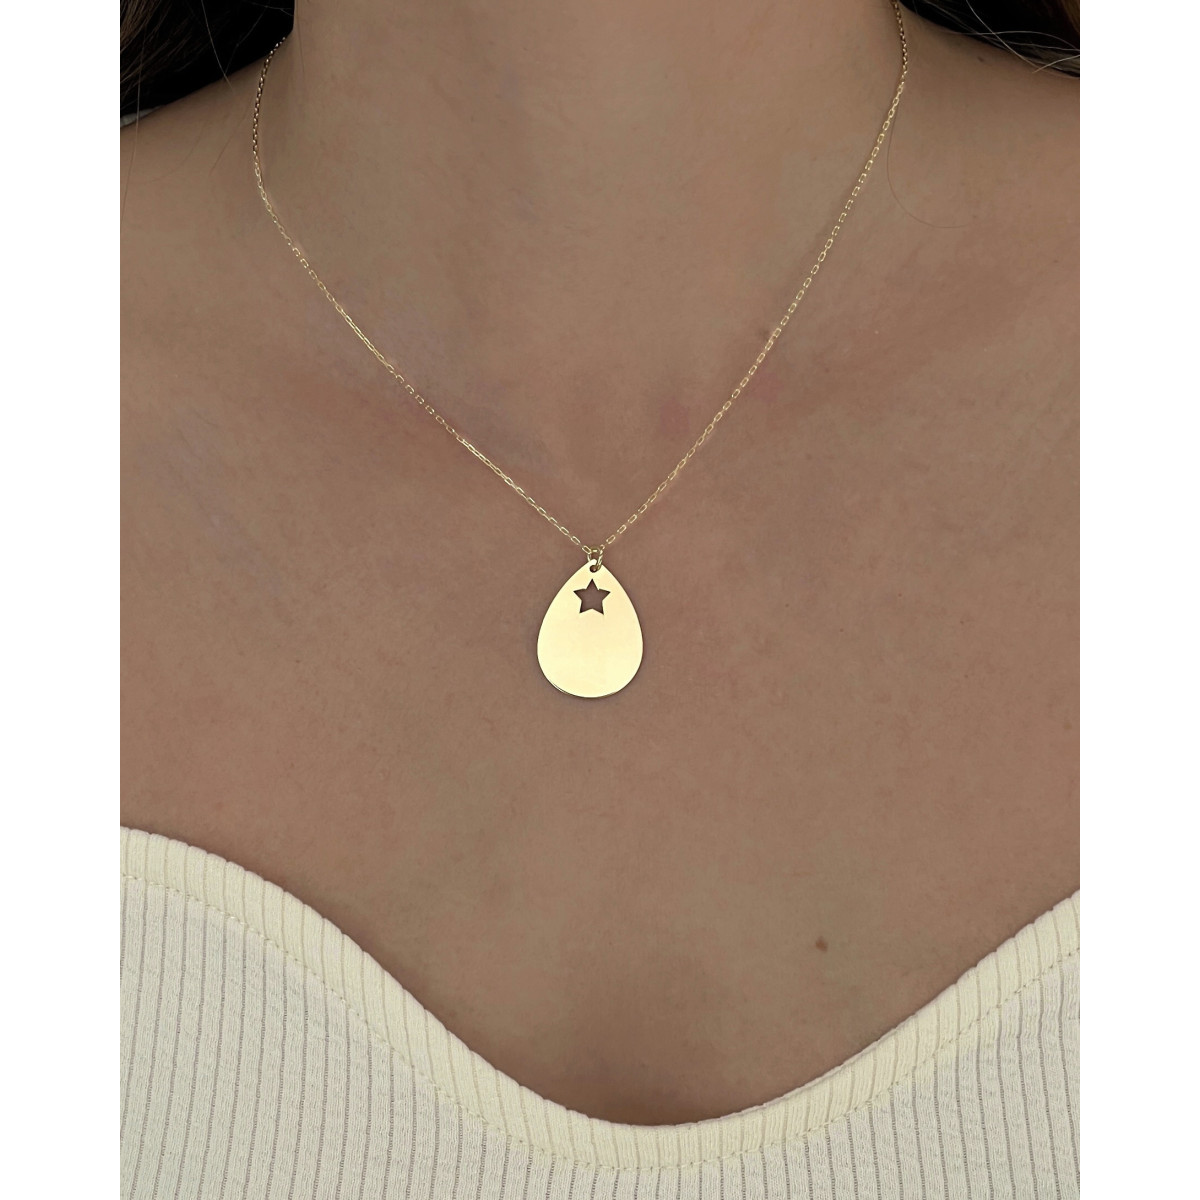 TEAR DROP PLATE WITH STAR PENDANT NECKLACE